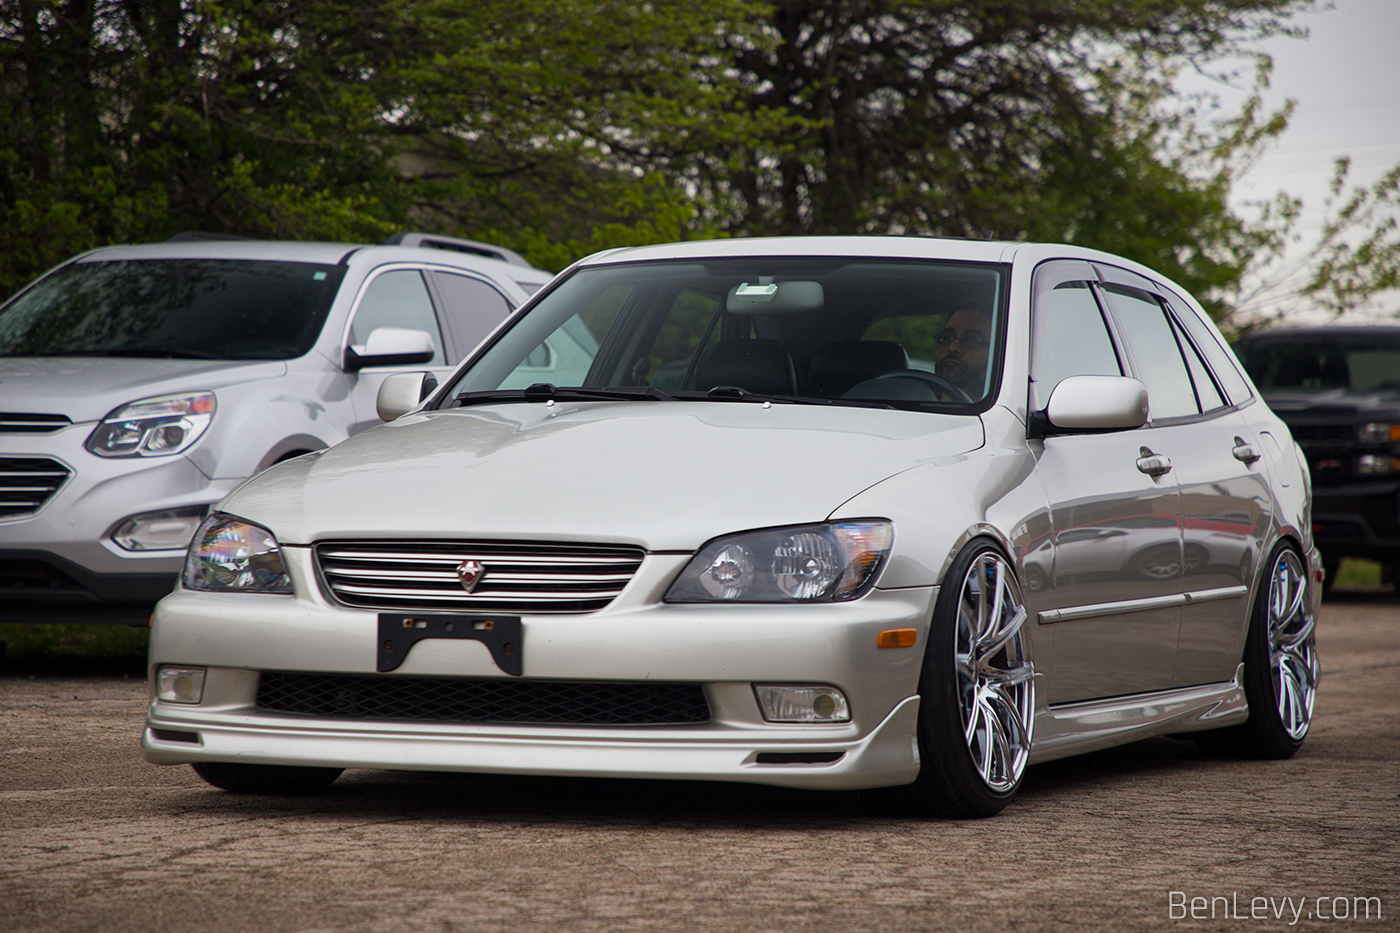 Silver Lexus IS300 SportCross at Sound Performance